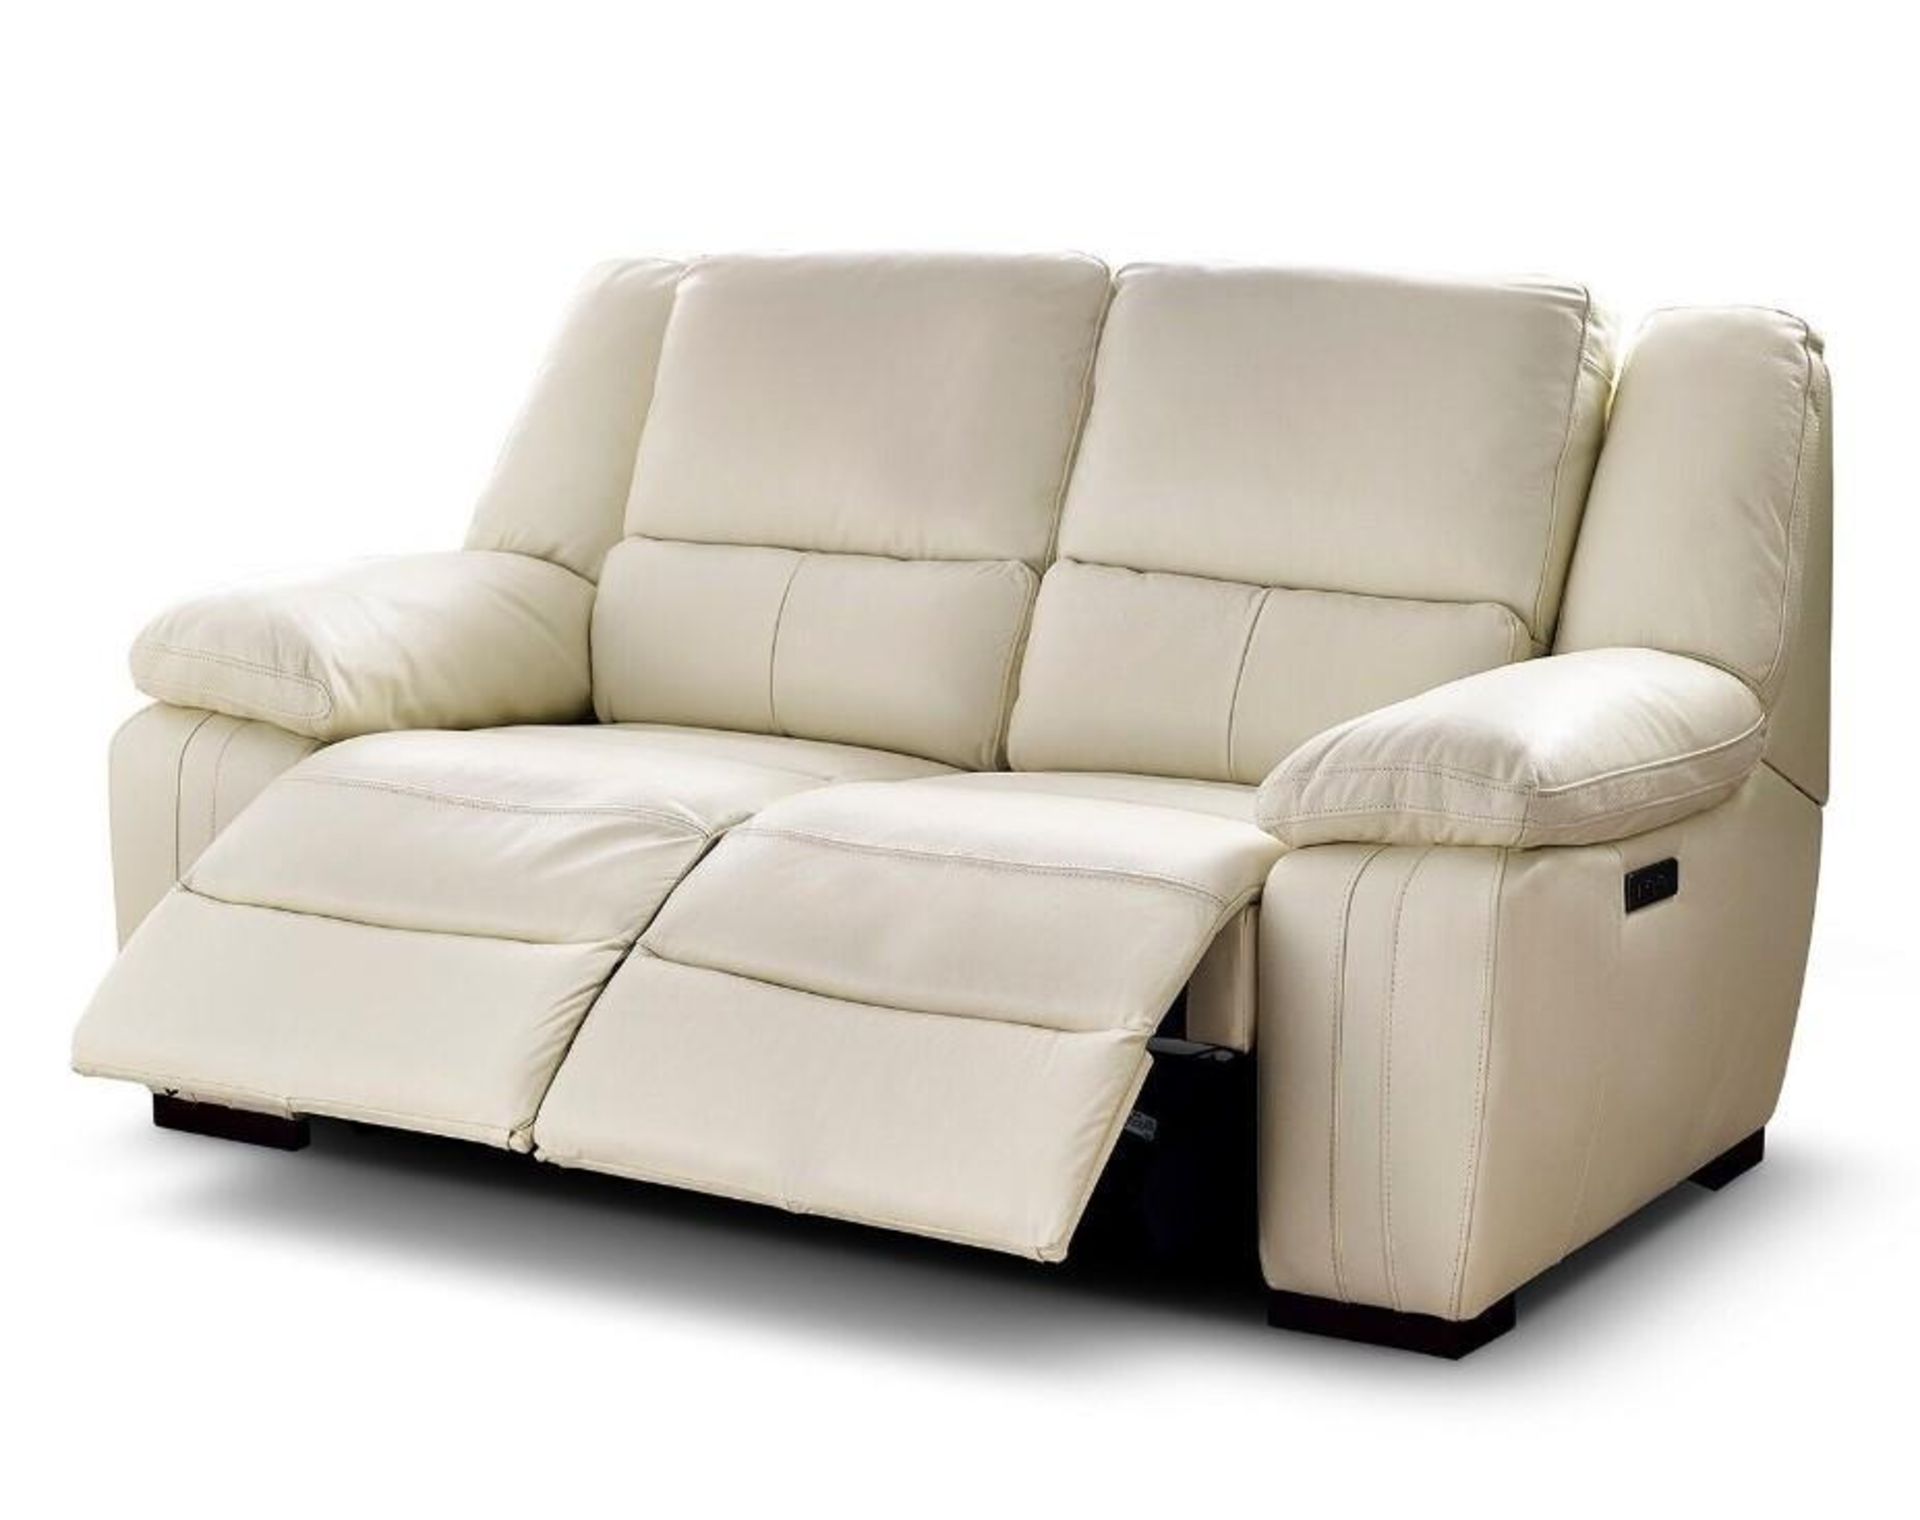 Brand new and boxed SCS Fallon 3 seater electric reclining sofa in Cream. - Image 3 of 7